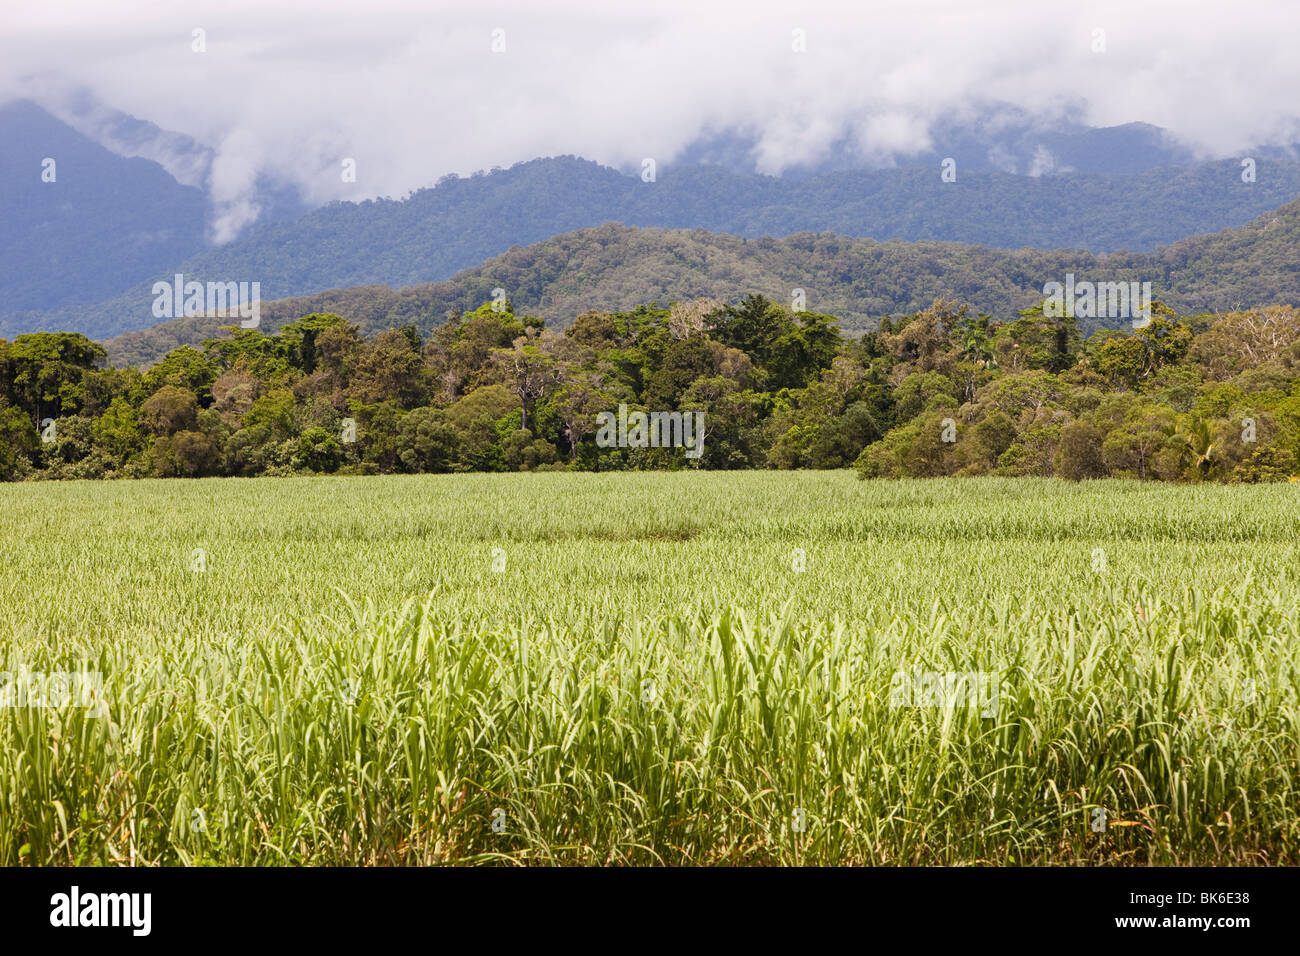 Daintree rain forest, deforested to make way for sugar cane plantations, Queensland, Australia. Stock Photo